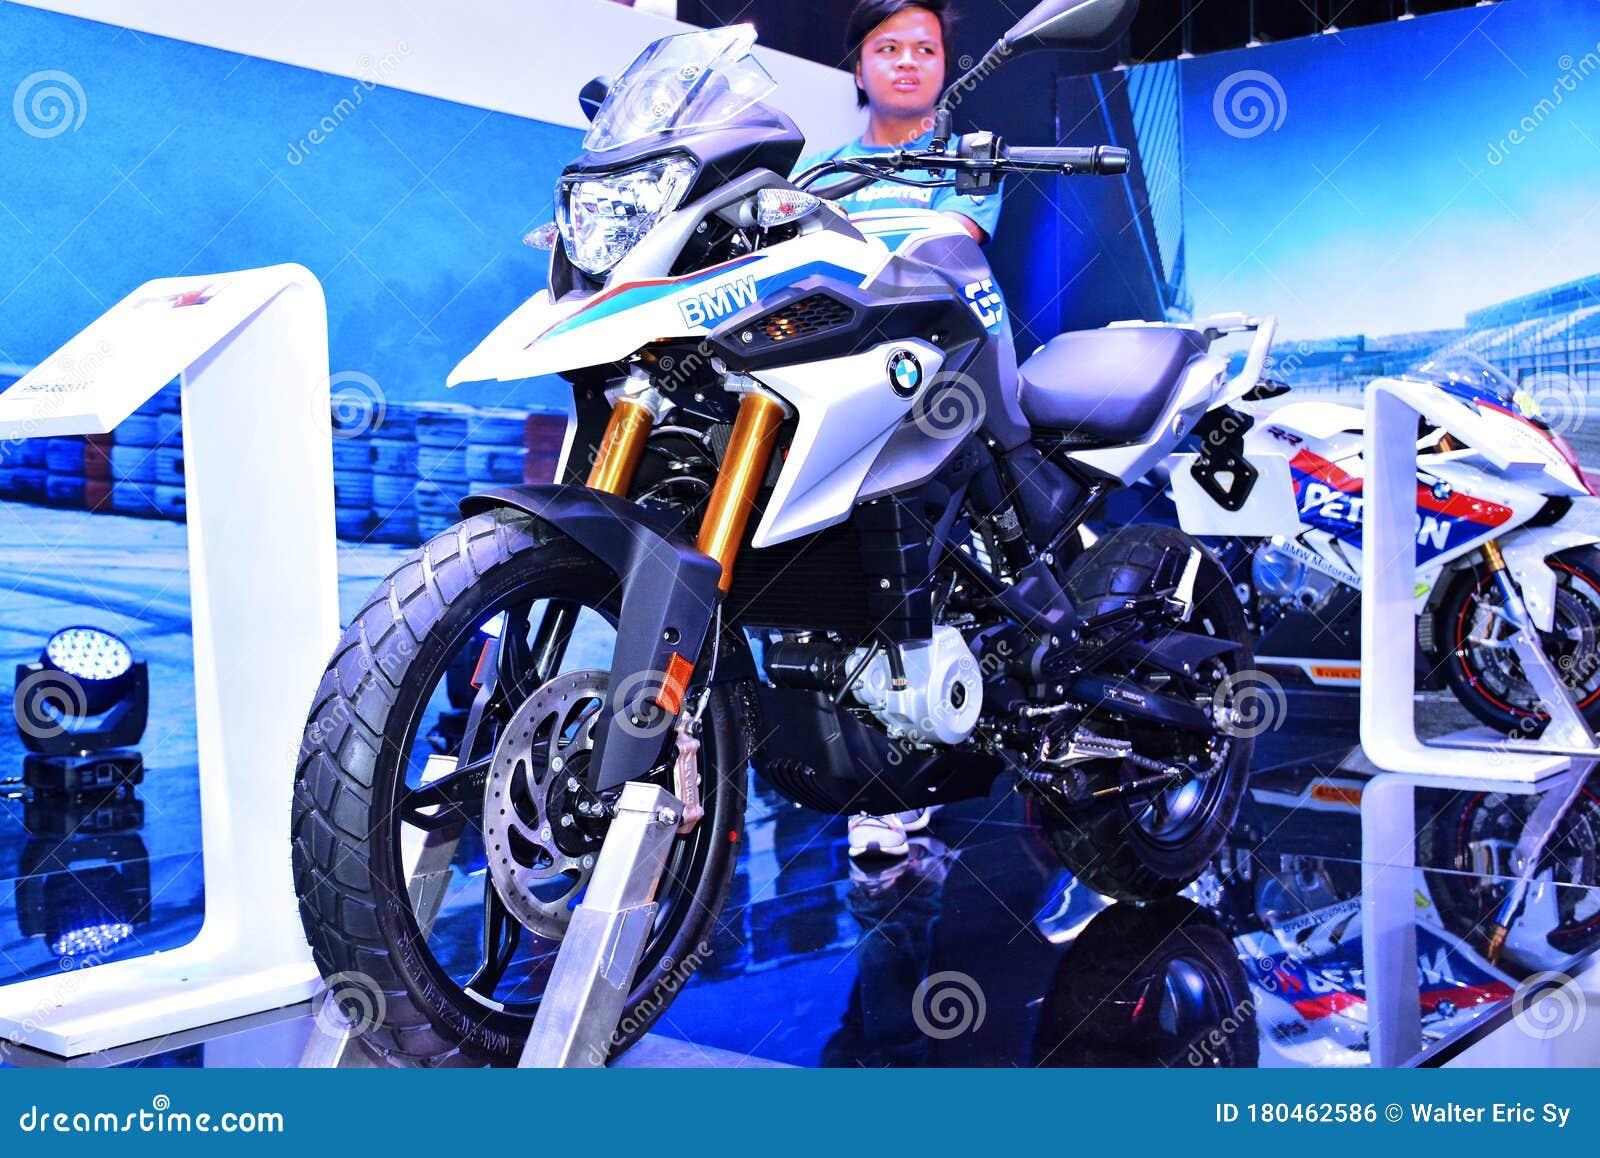 BMW GS Motorcycle at Manila International Auto Show in Pasay